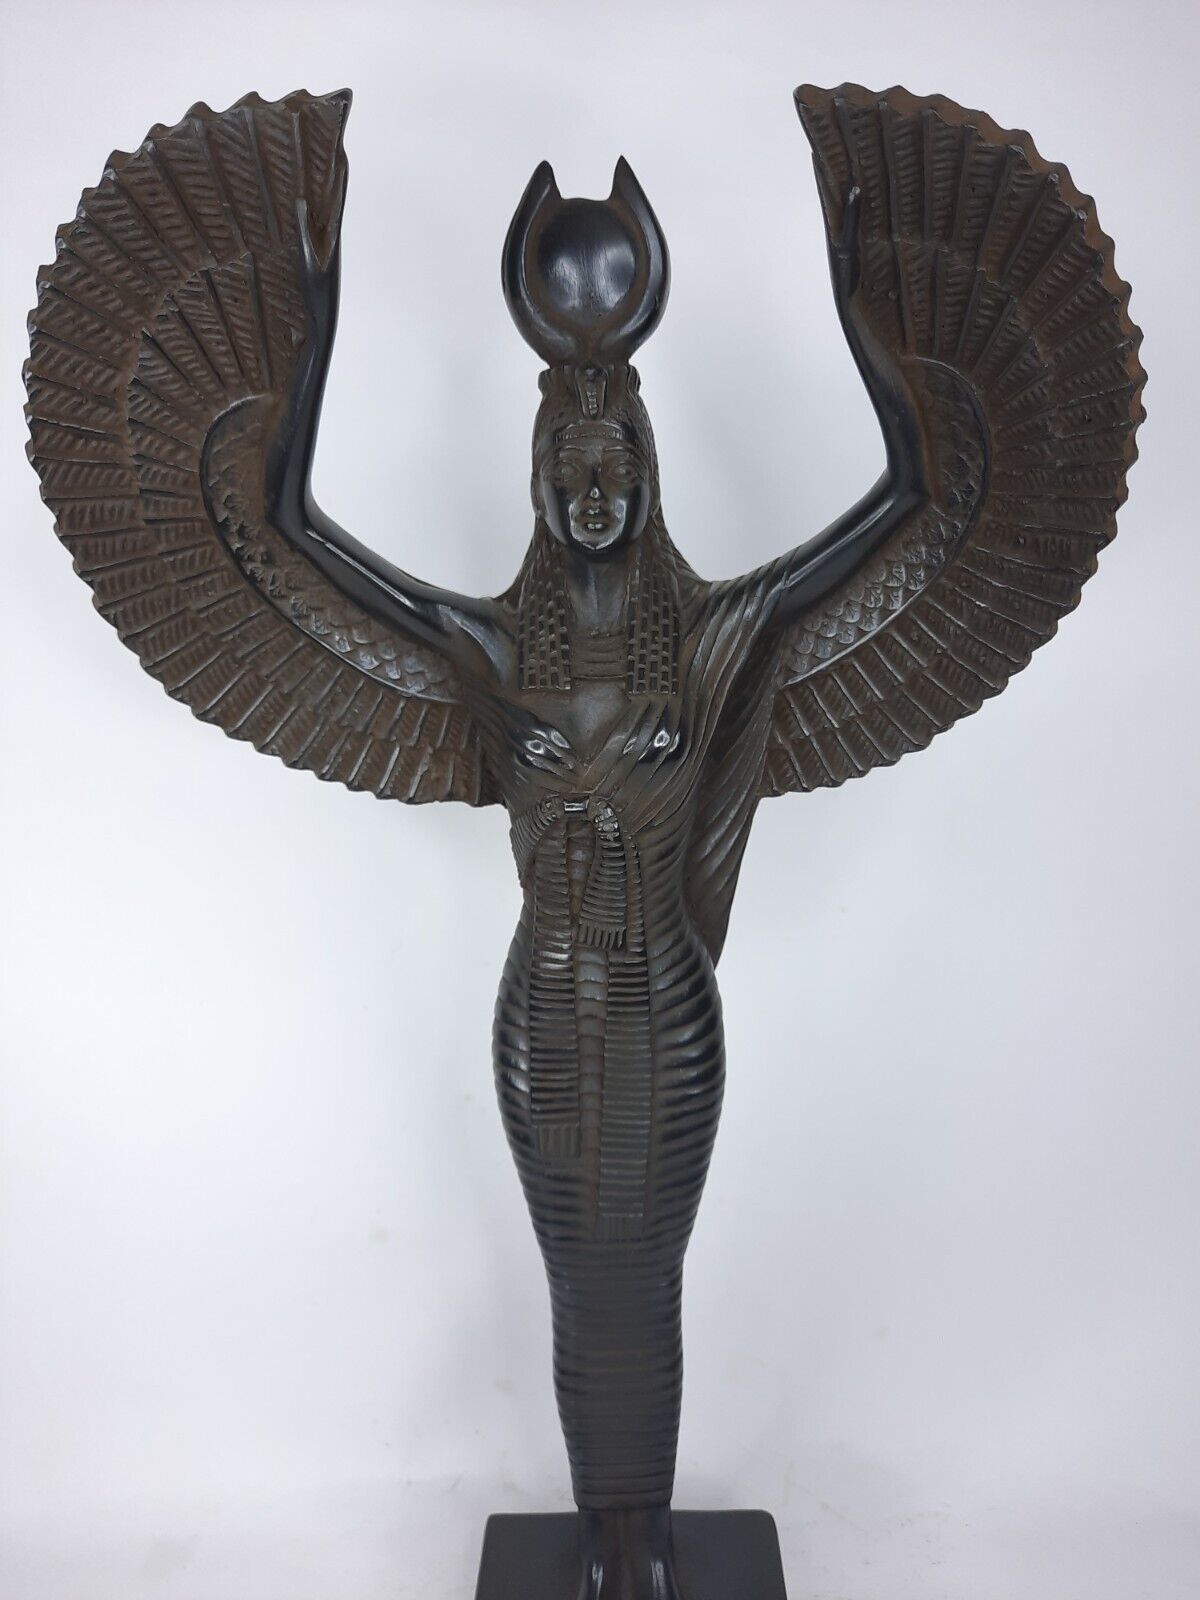 UNIQUE ANCIENT EGYPTIAN STANDING Isis Goddess with Symbol of Hathor on the Head